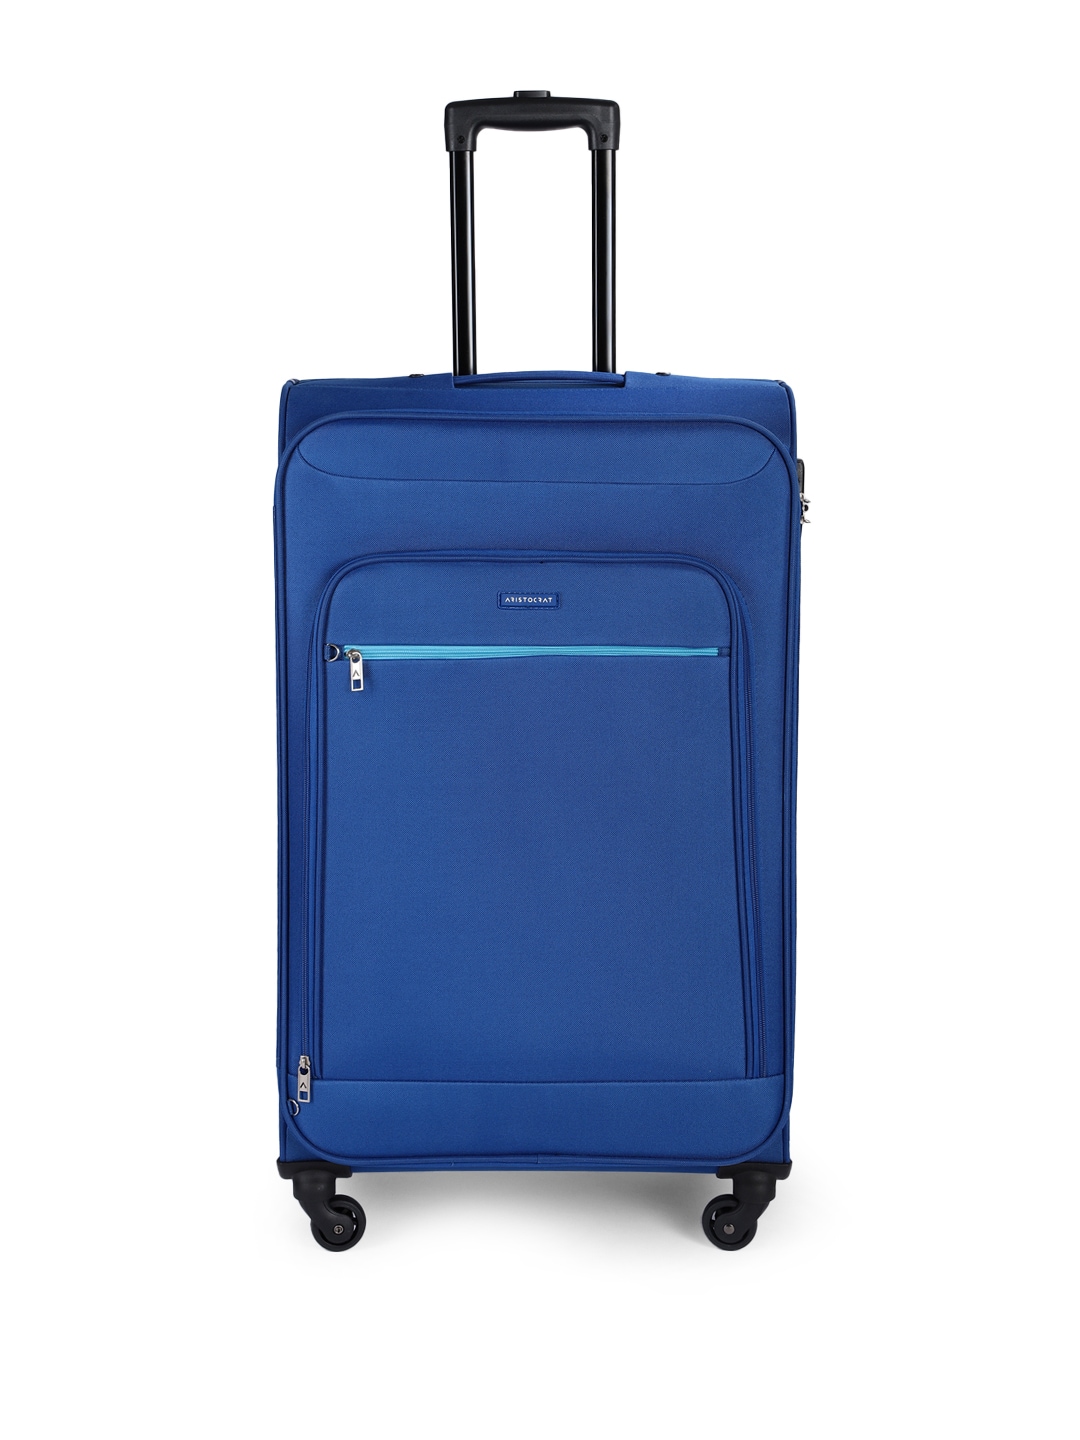 Aristocrat Bright Blue Solid Nile Exp Strolly 76 Large Luggage Trolley Suitcase Price in India